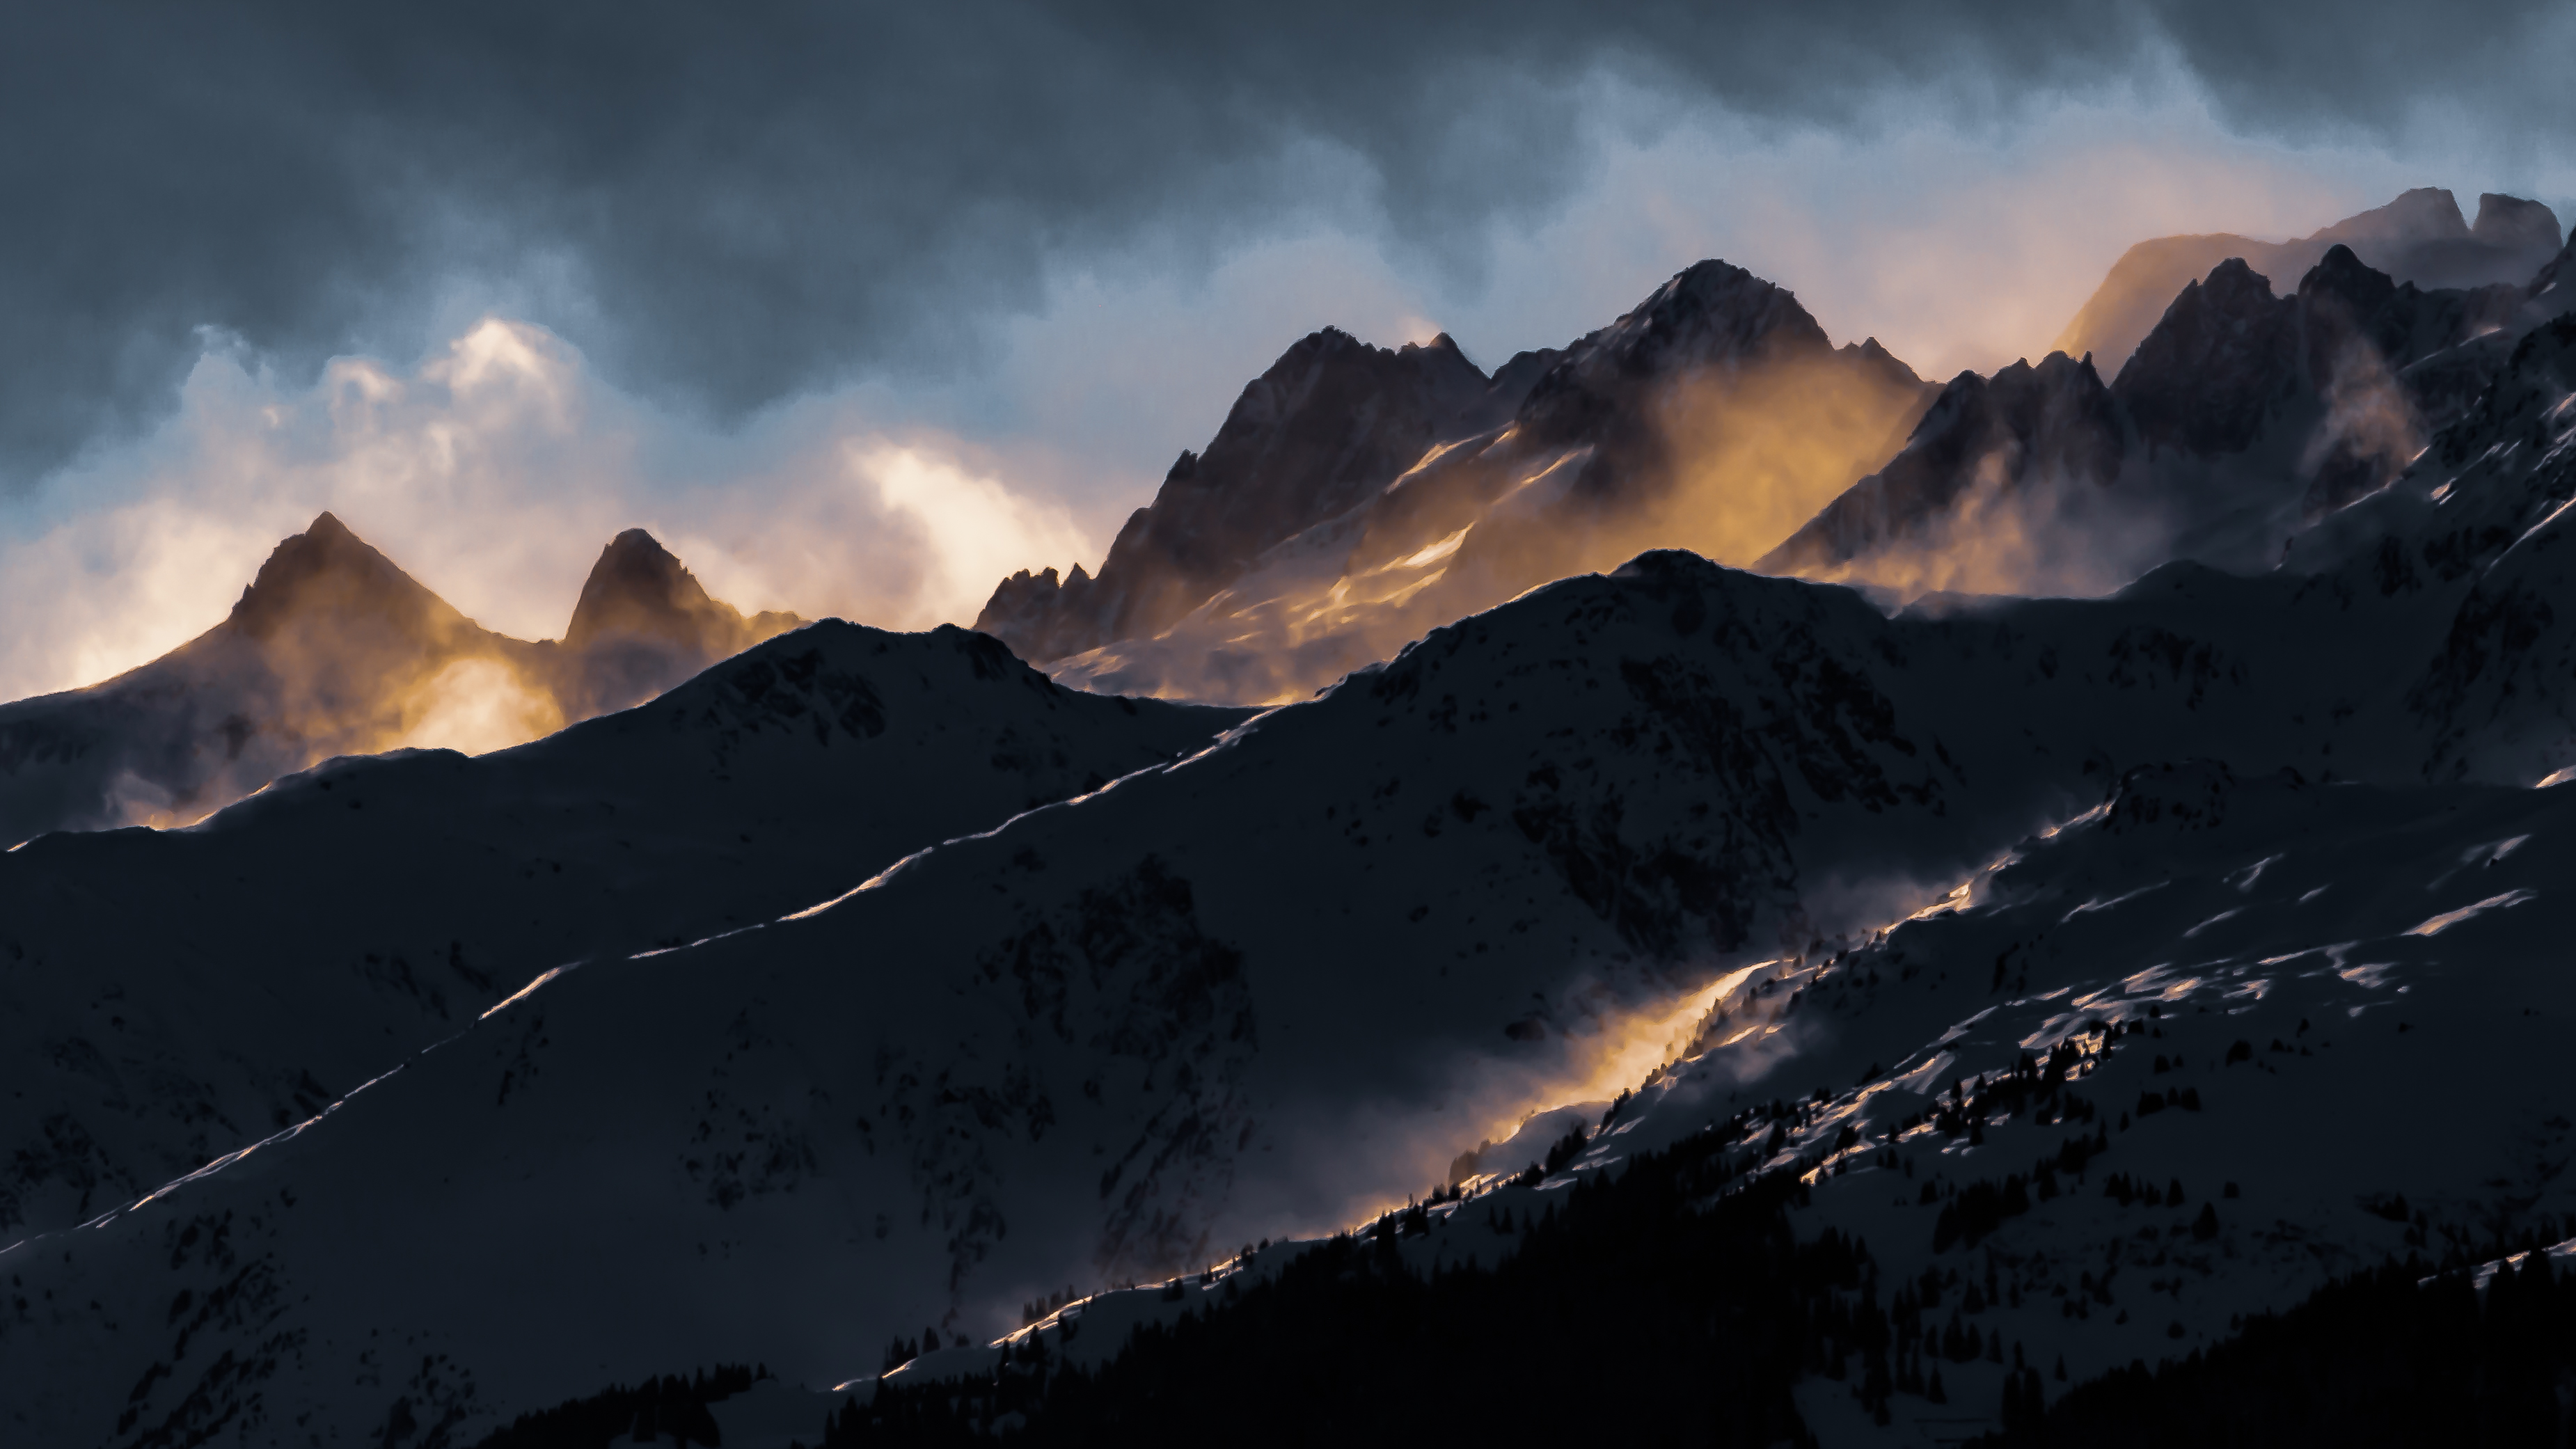 Light Mountains Clouds by Peter Hungerford